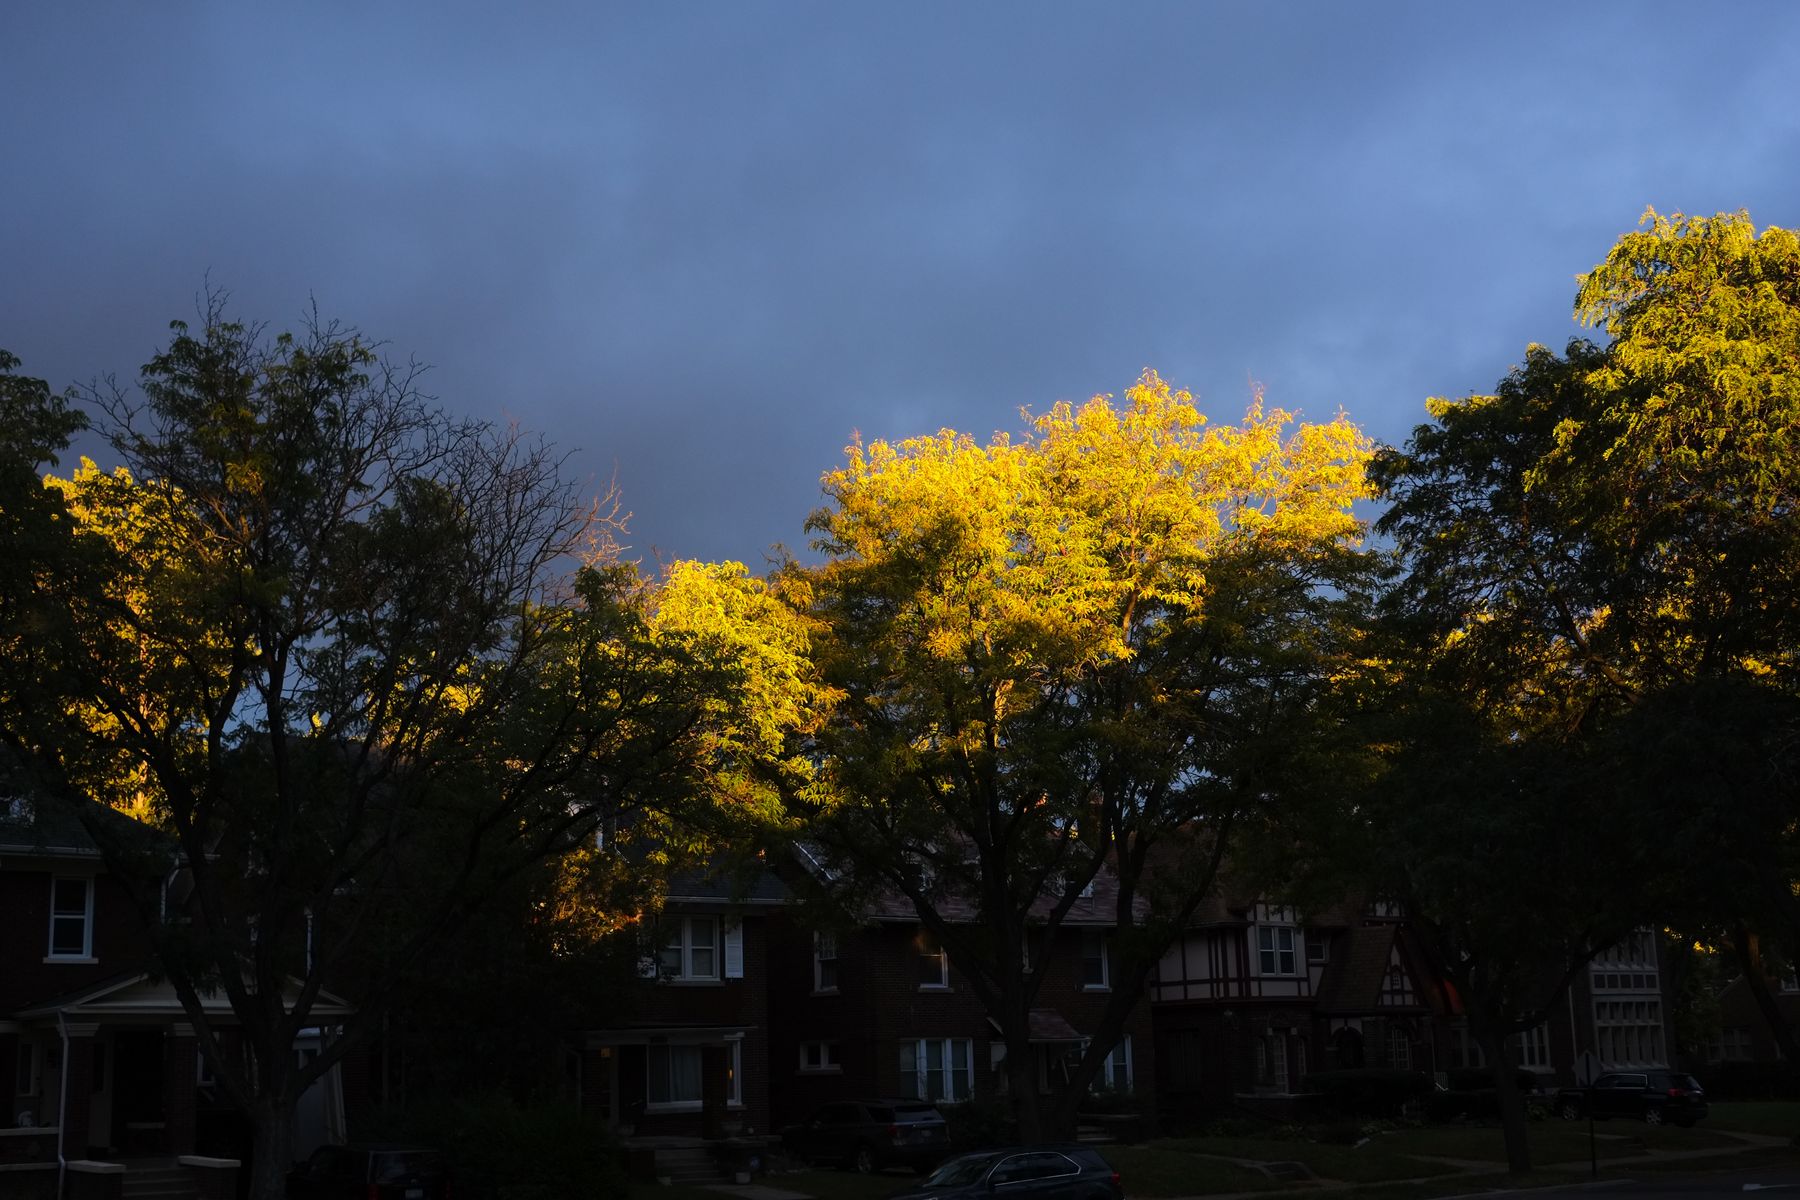 Fall yellows in locust l at dusk. Shady houses, silhouettes of other trees.